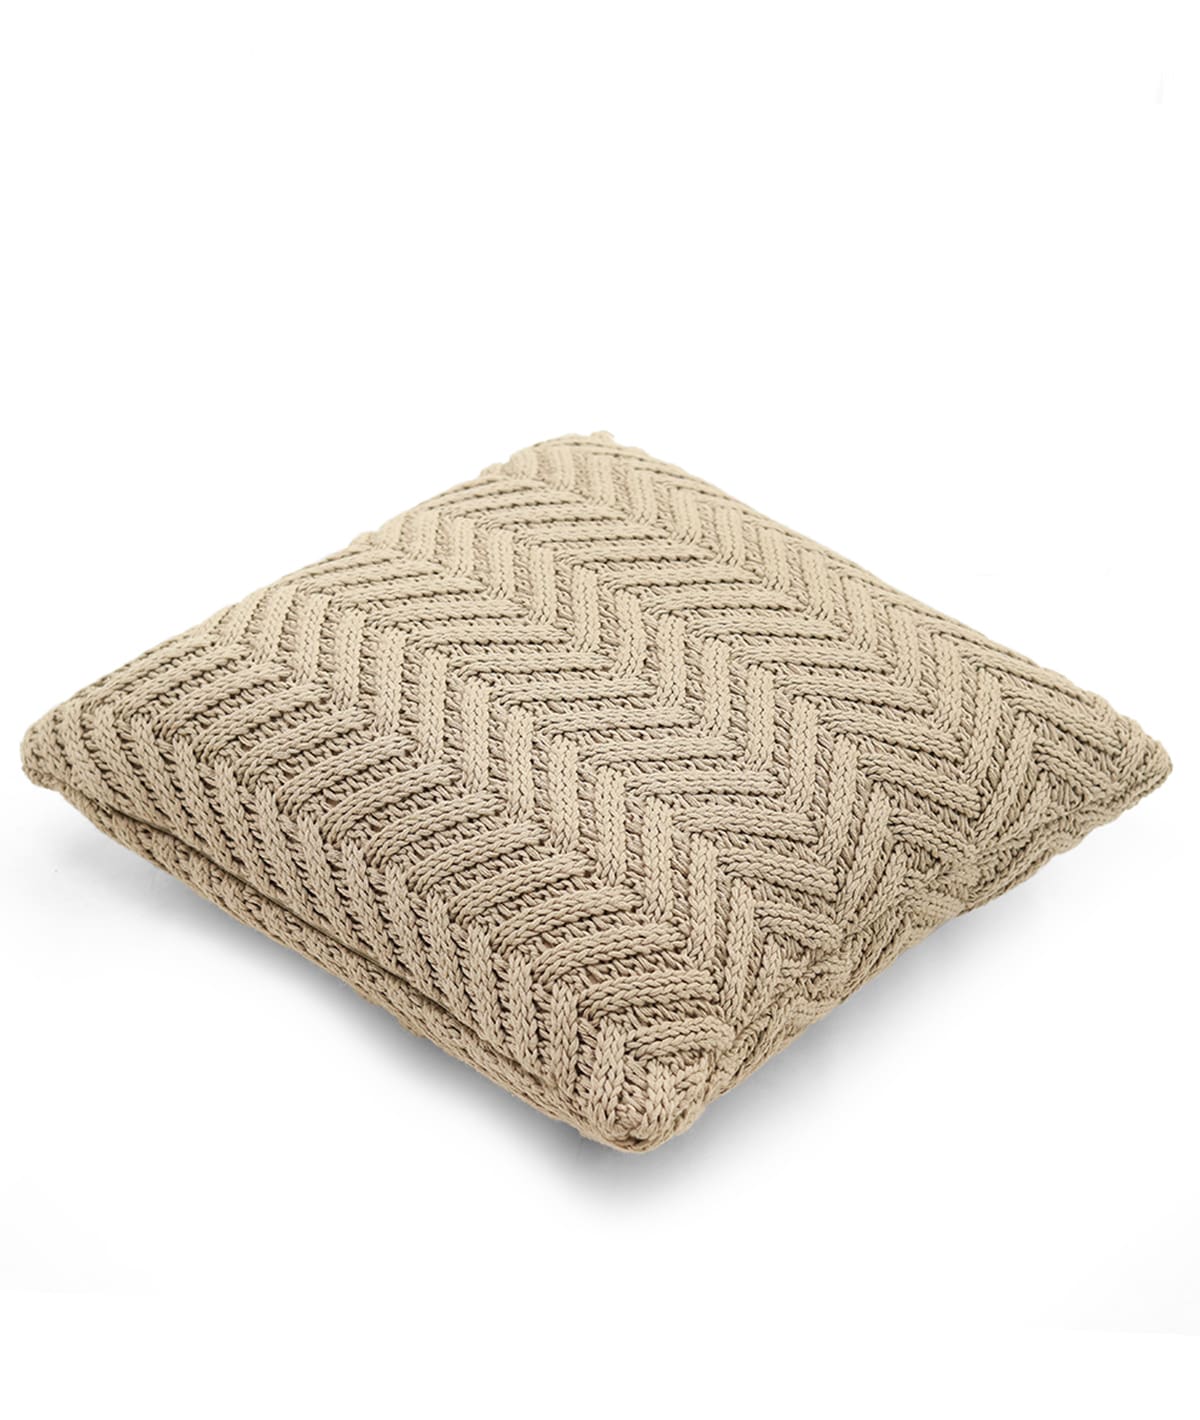 Chevron Oatmeal Cotton Knitted Decorative 16 X 16 Inches Cushion Cover